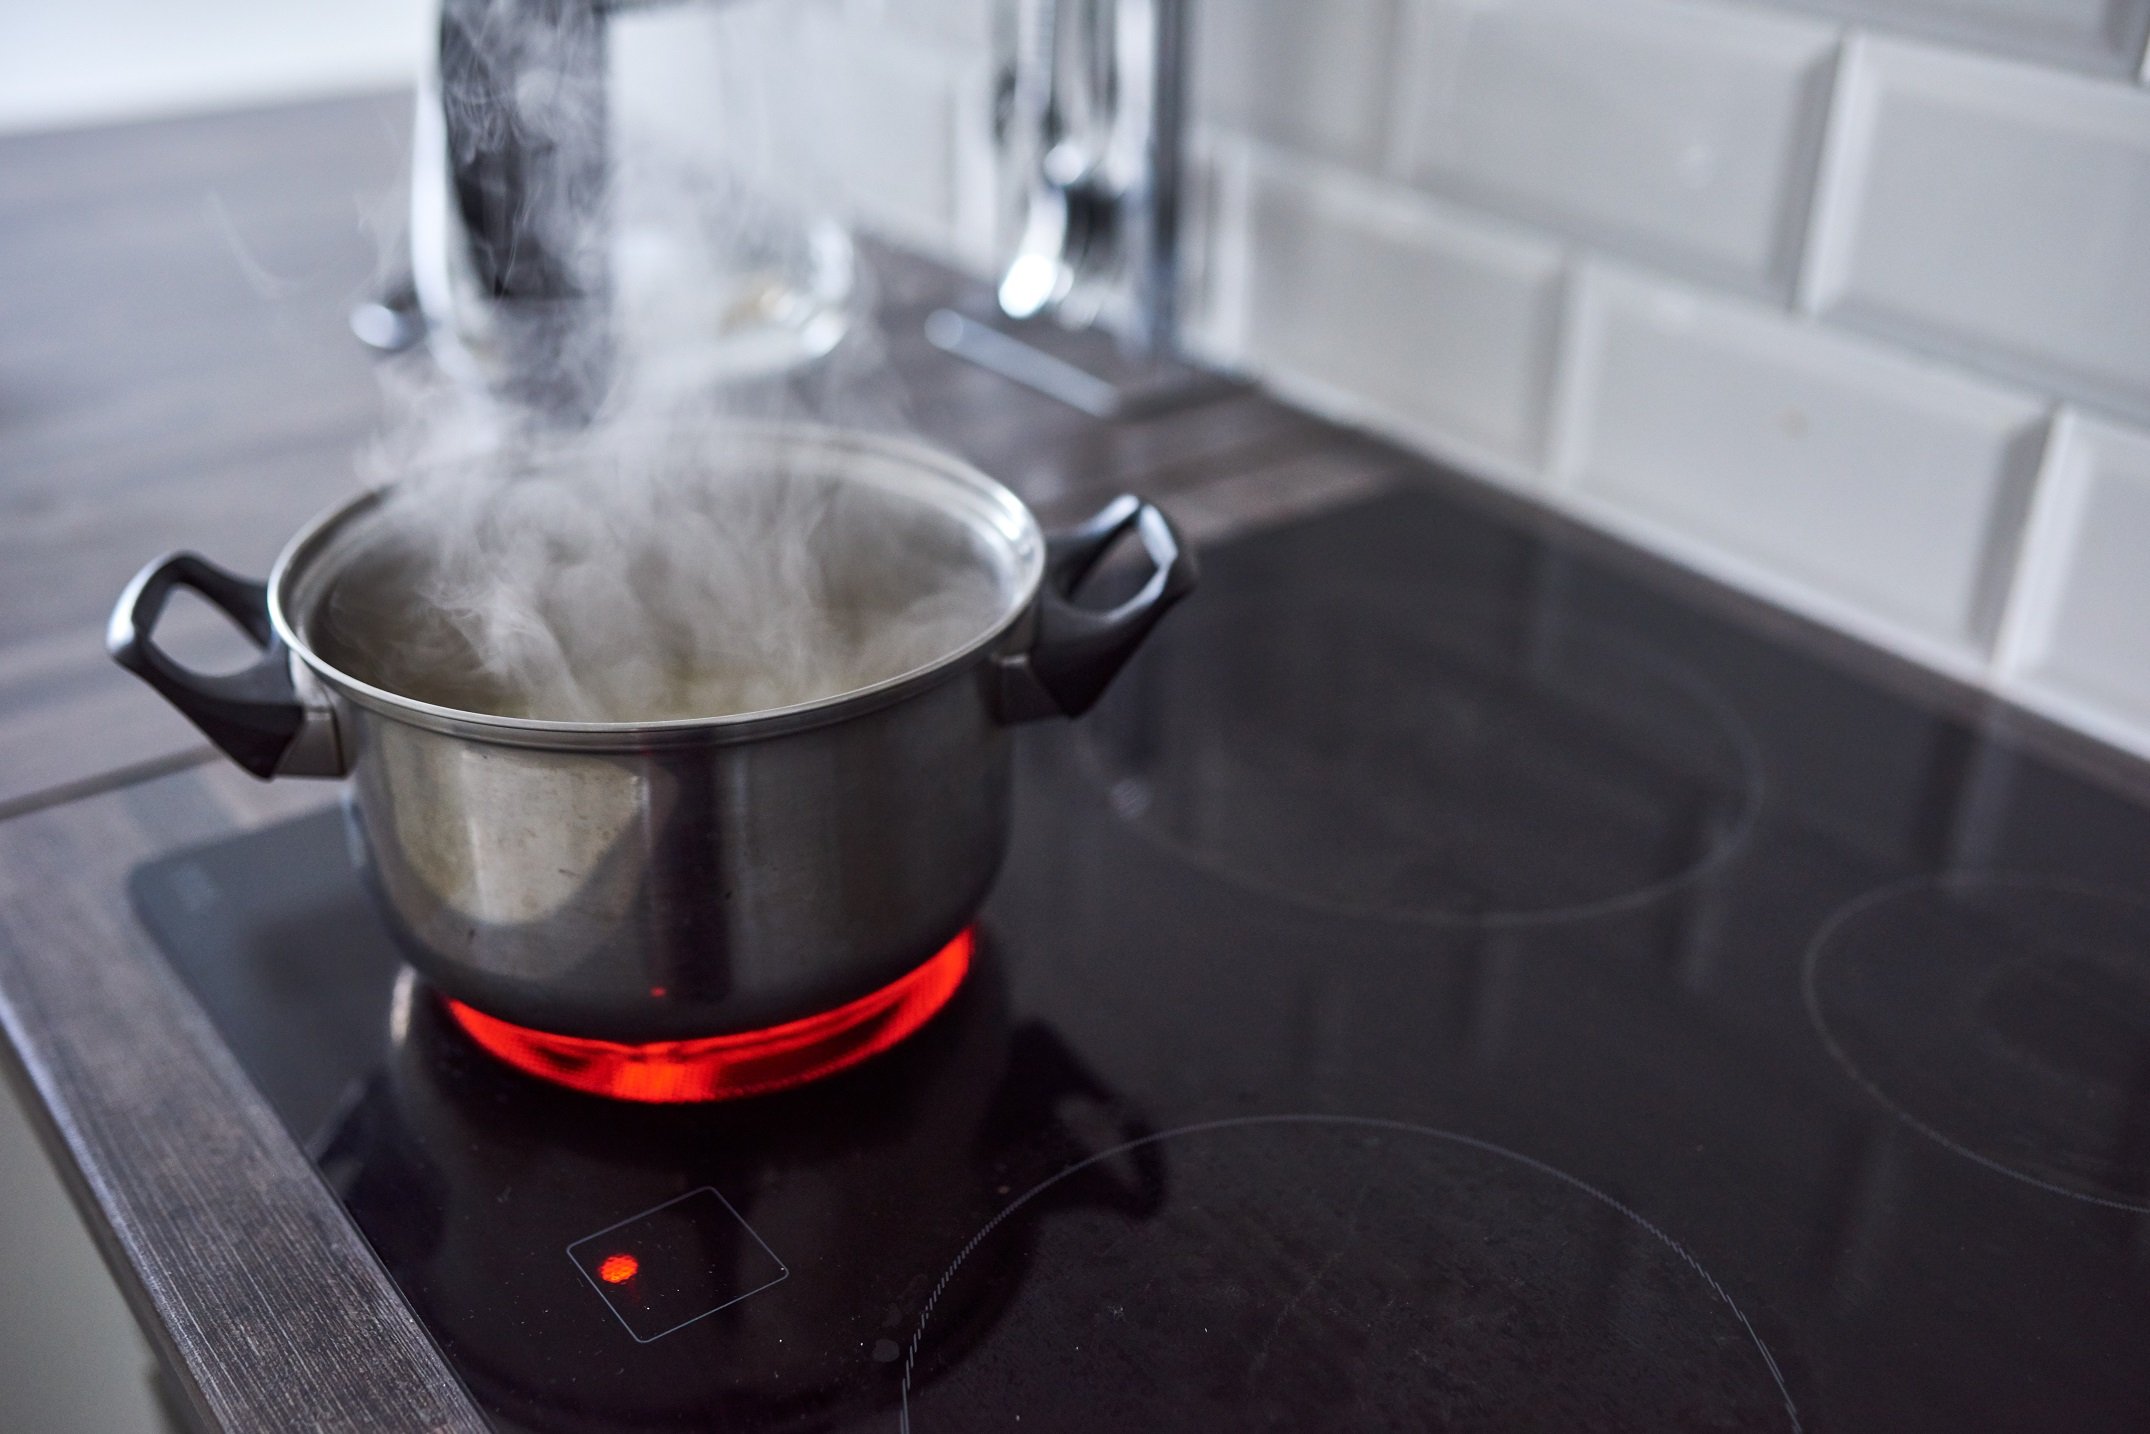 Pot of boiling water on stove top